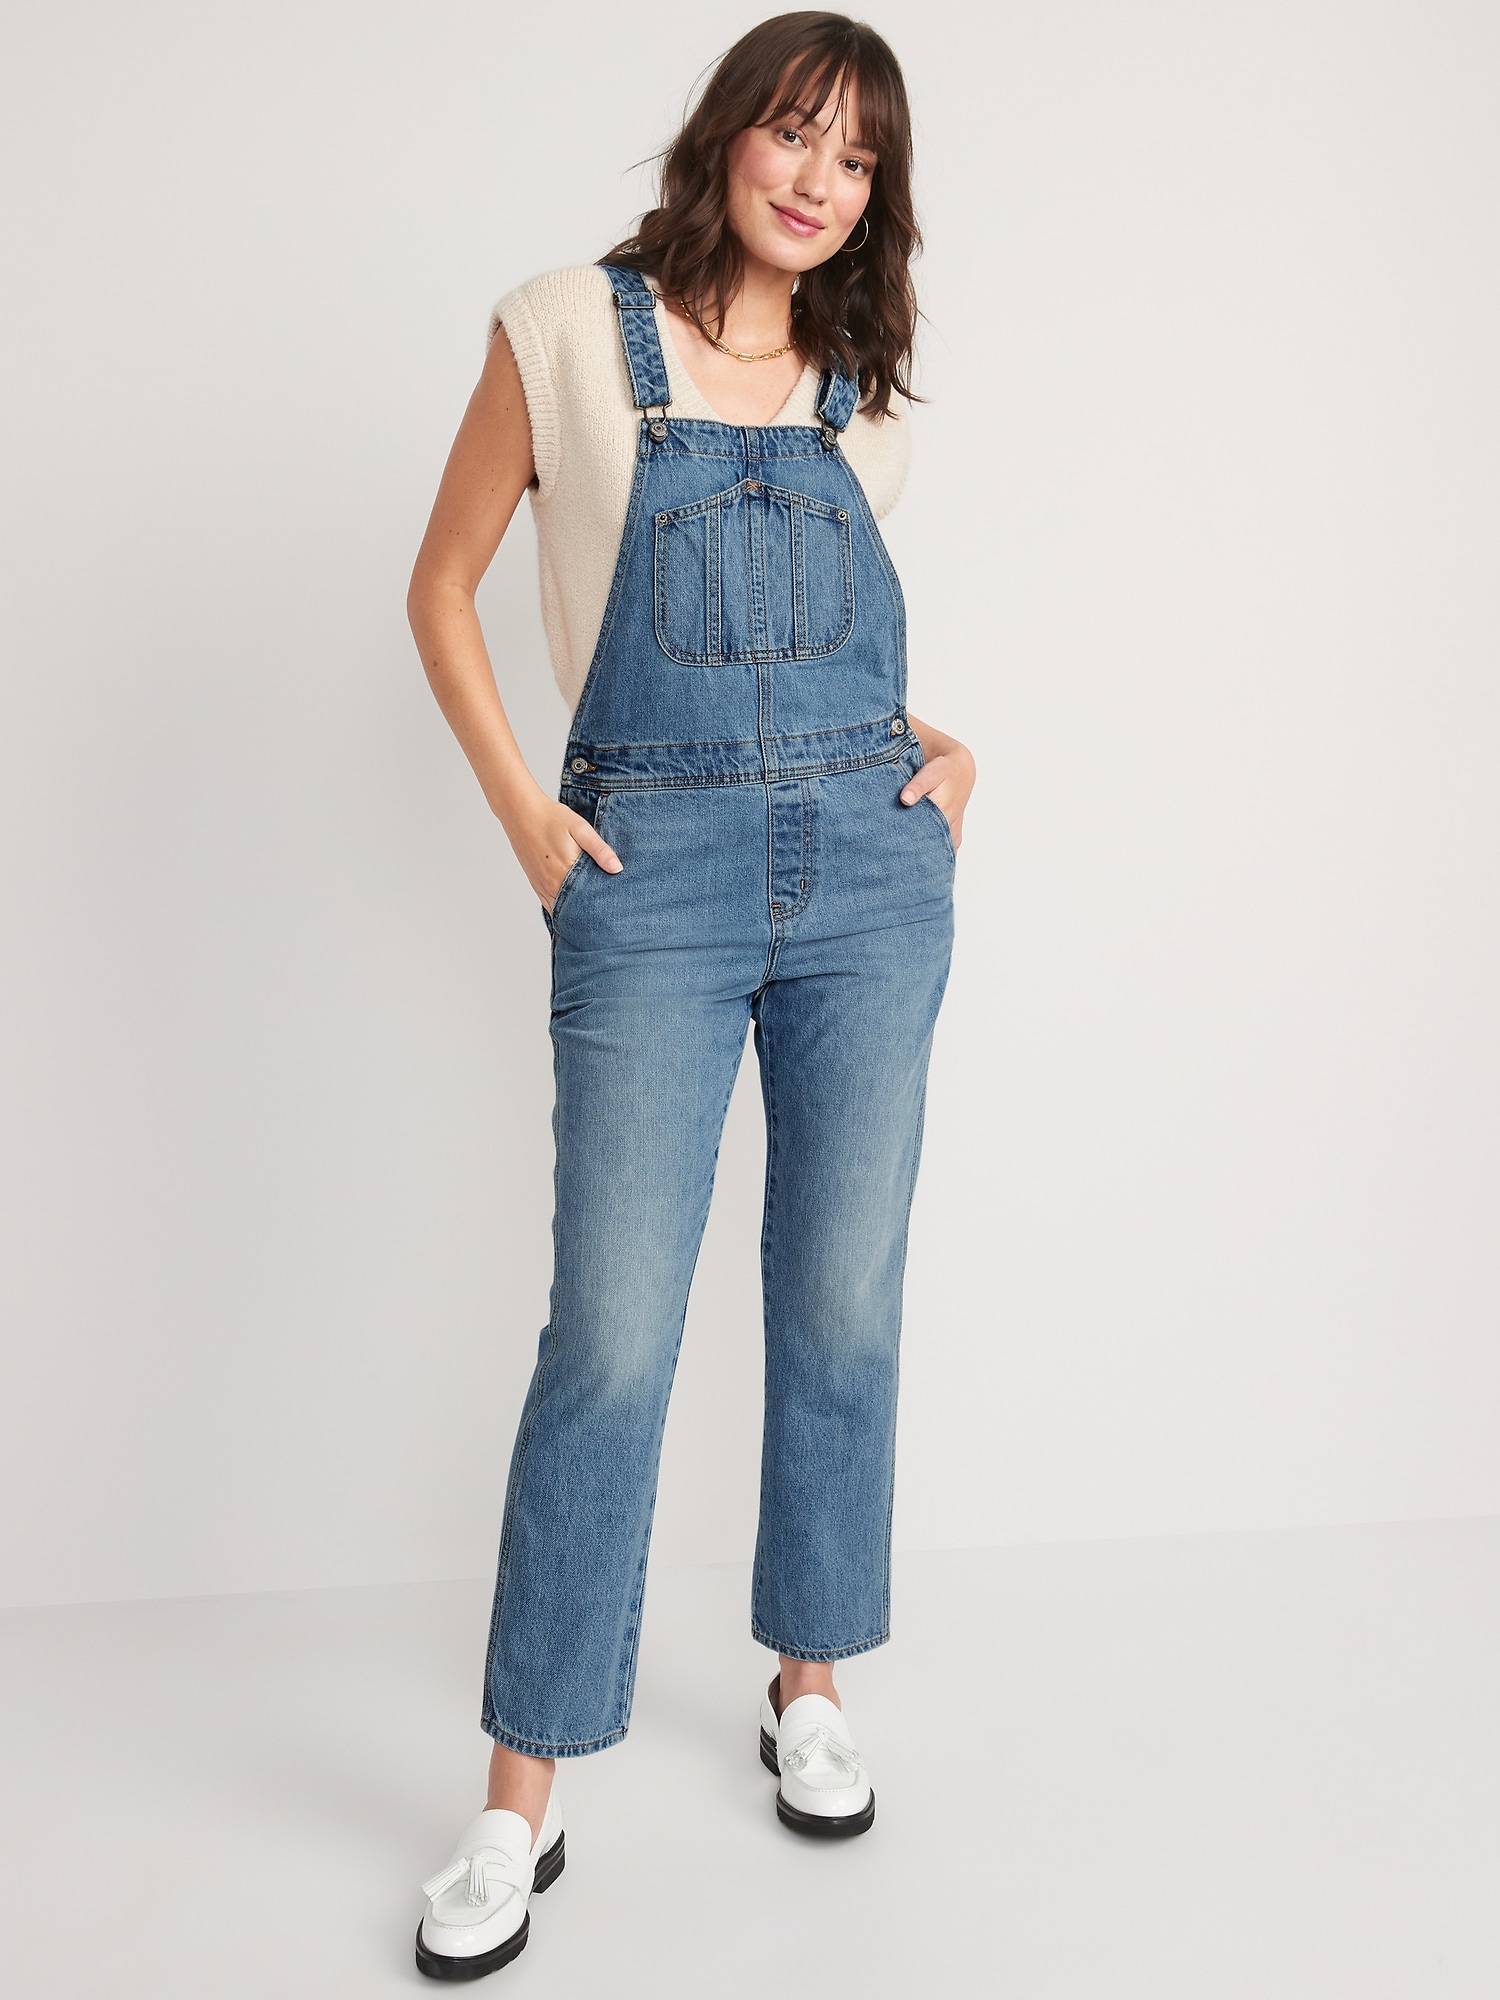 Slouchy Straight Non Stretch Jean Overalls For Women Old Navy